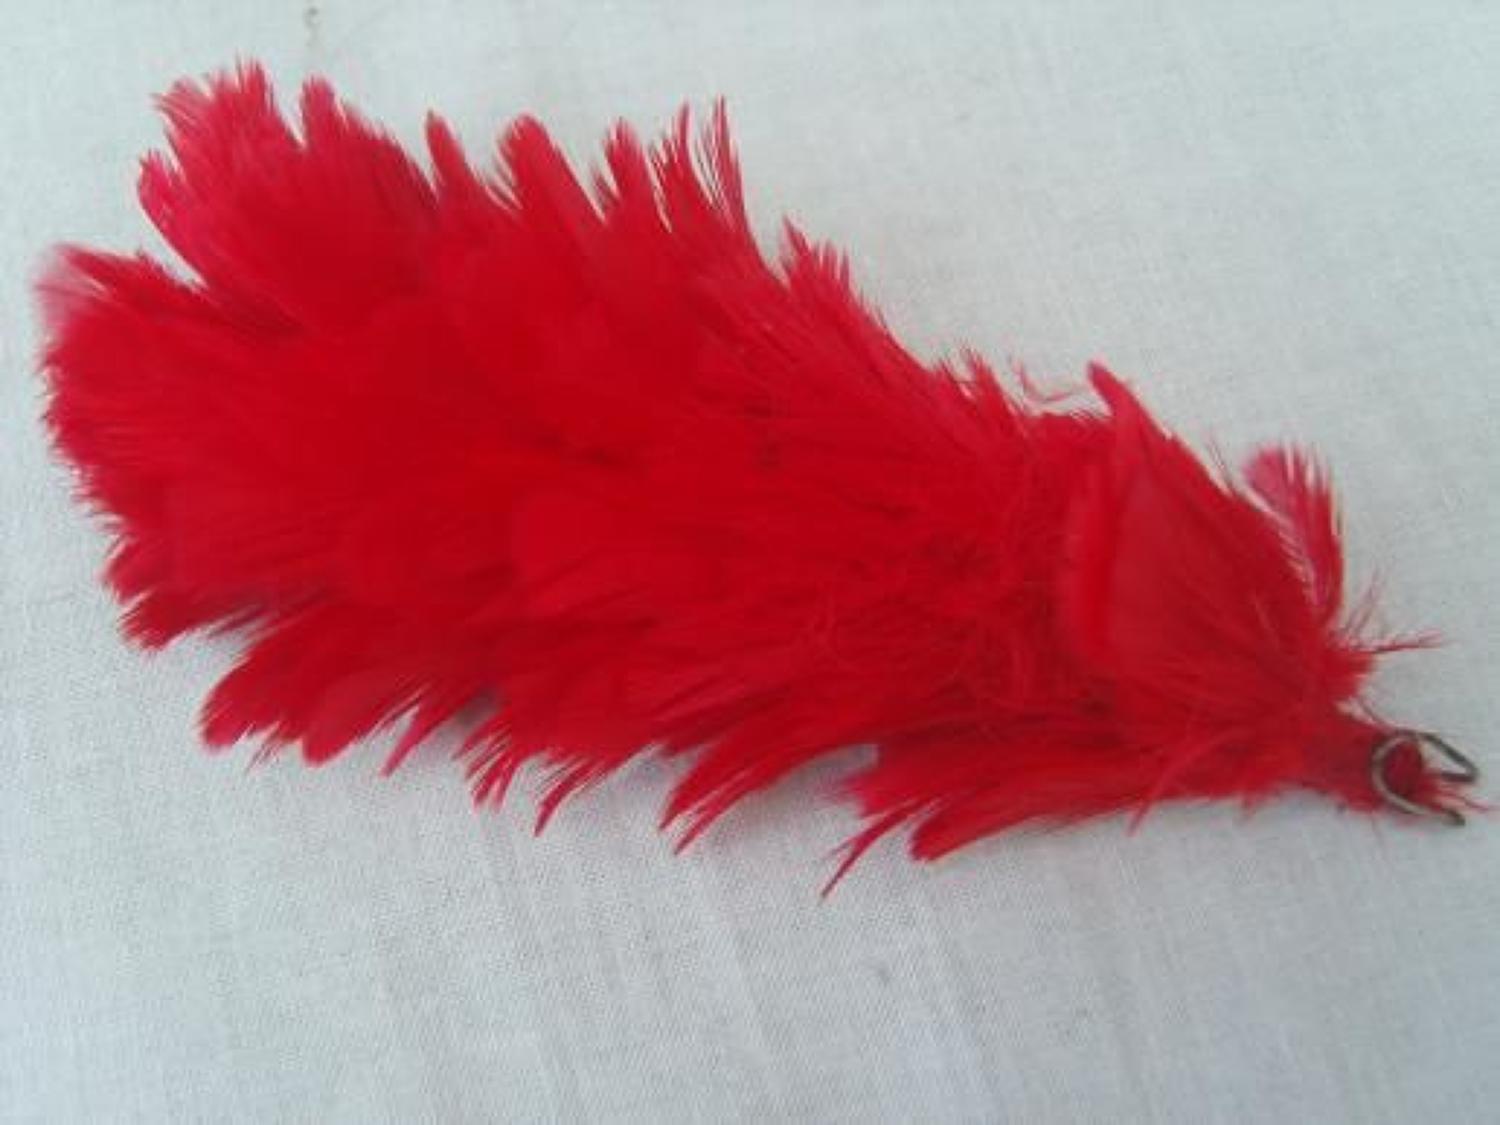 British Army red Tam or beret hackle.